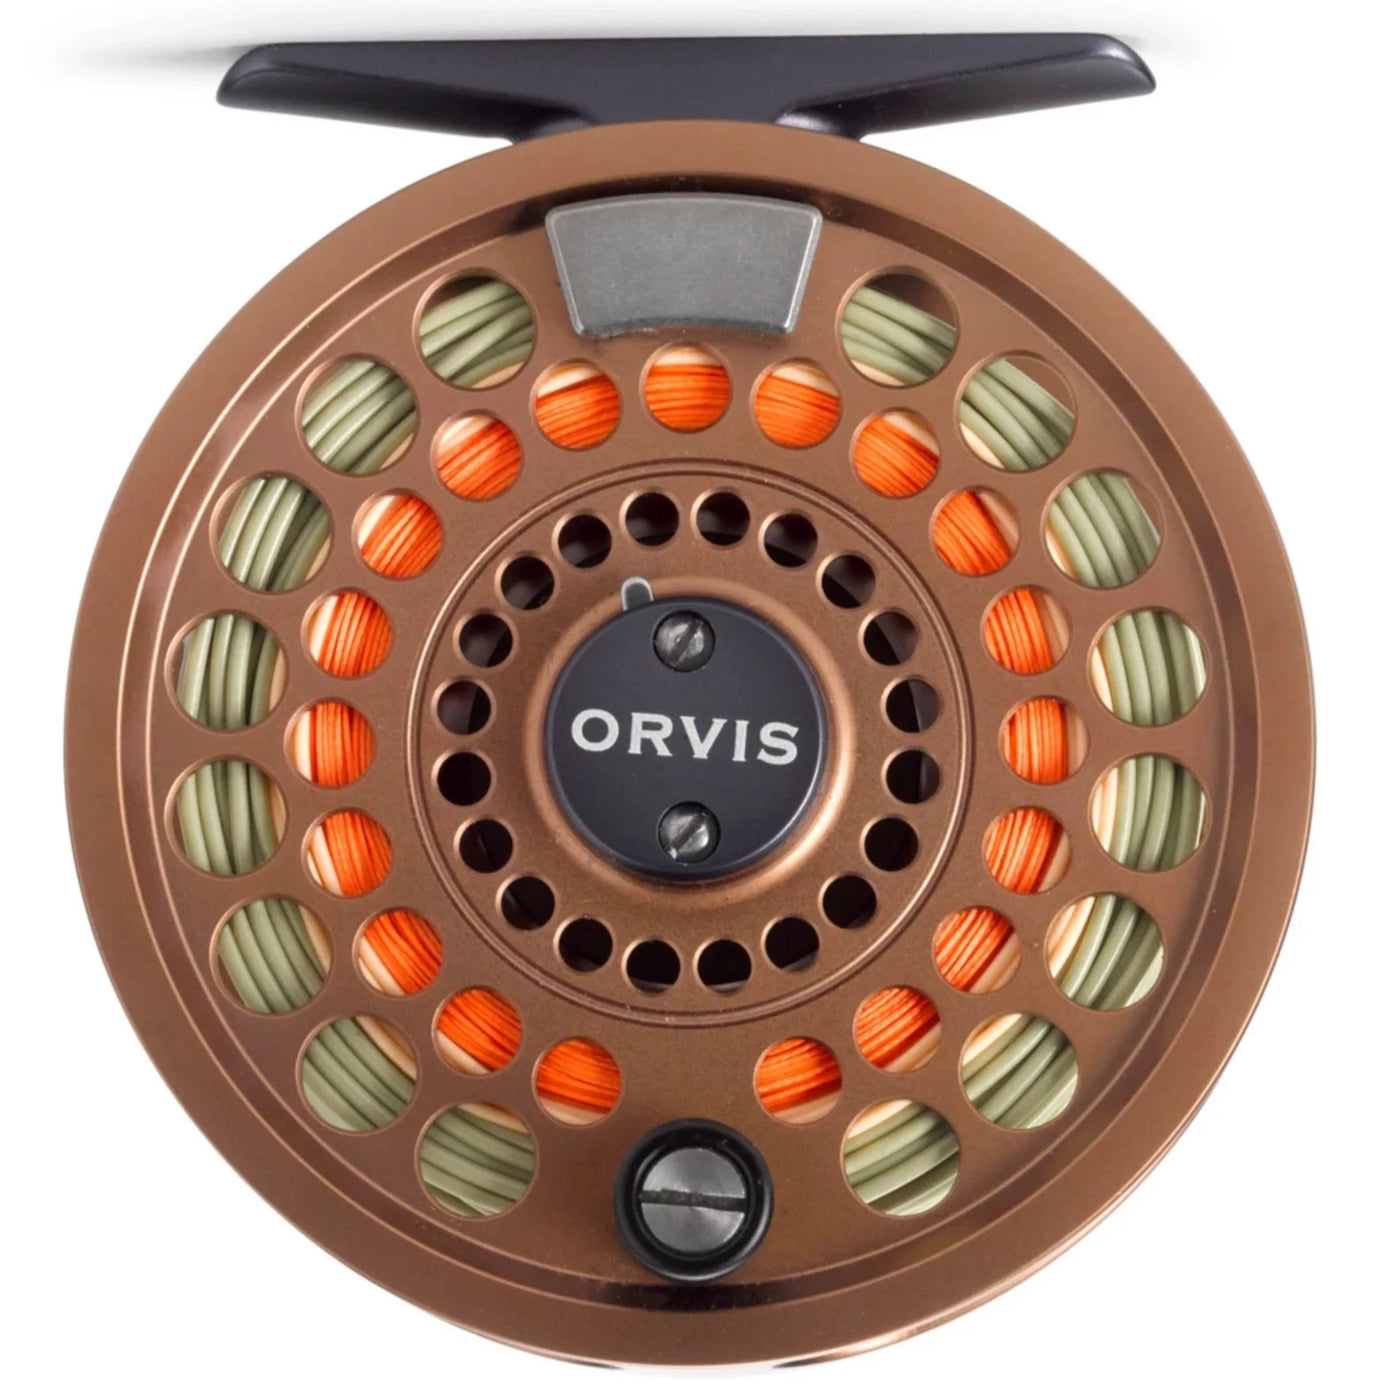 NEW Orvis Access Mid-Arbor Size: III fly fishing reel